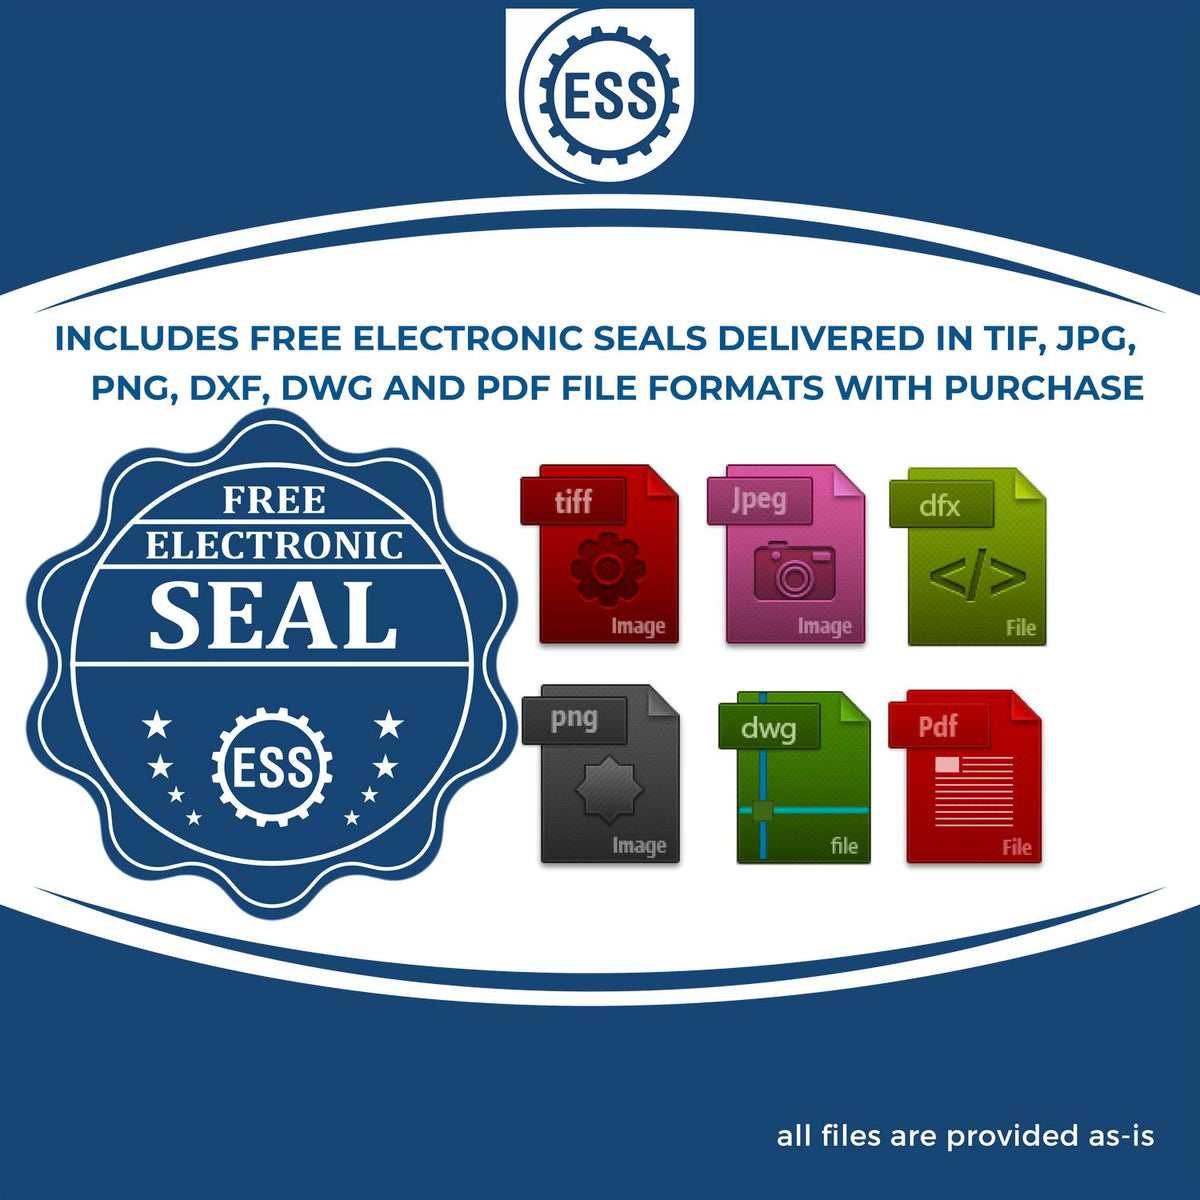 An infographic for the free electronic seal for the Gift Indiana Geologist Seal illustrating the different file type icons such as DXF, DWG, TIF, JPG and PNG.